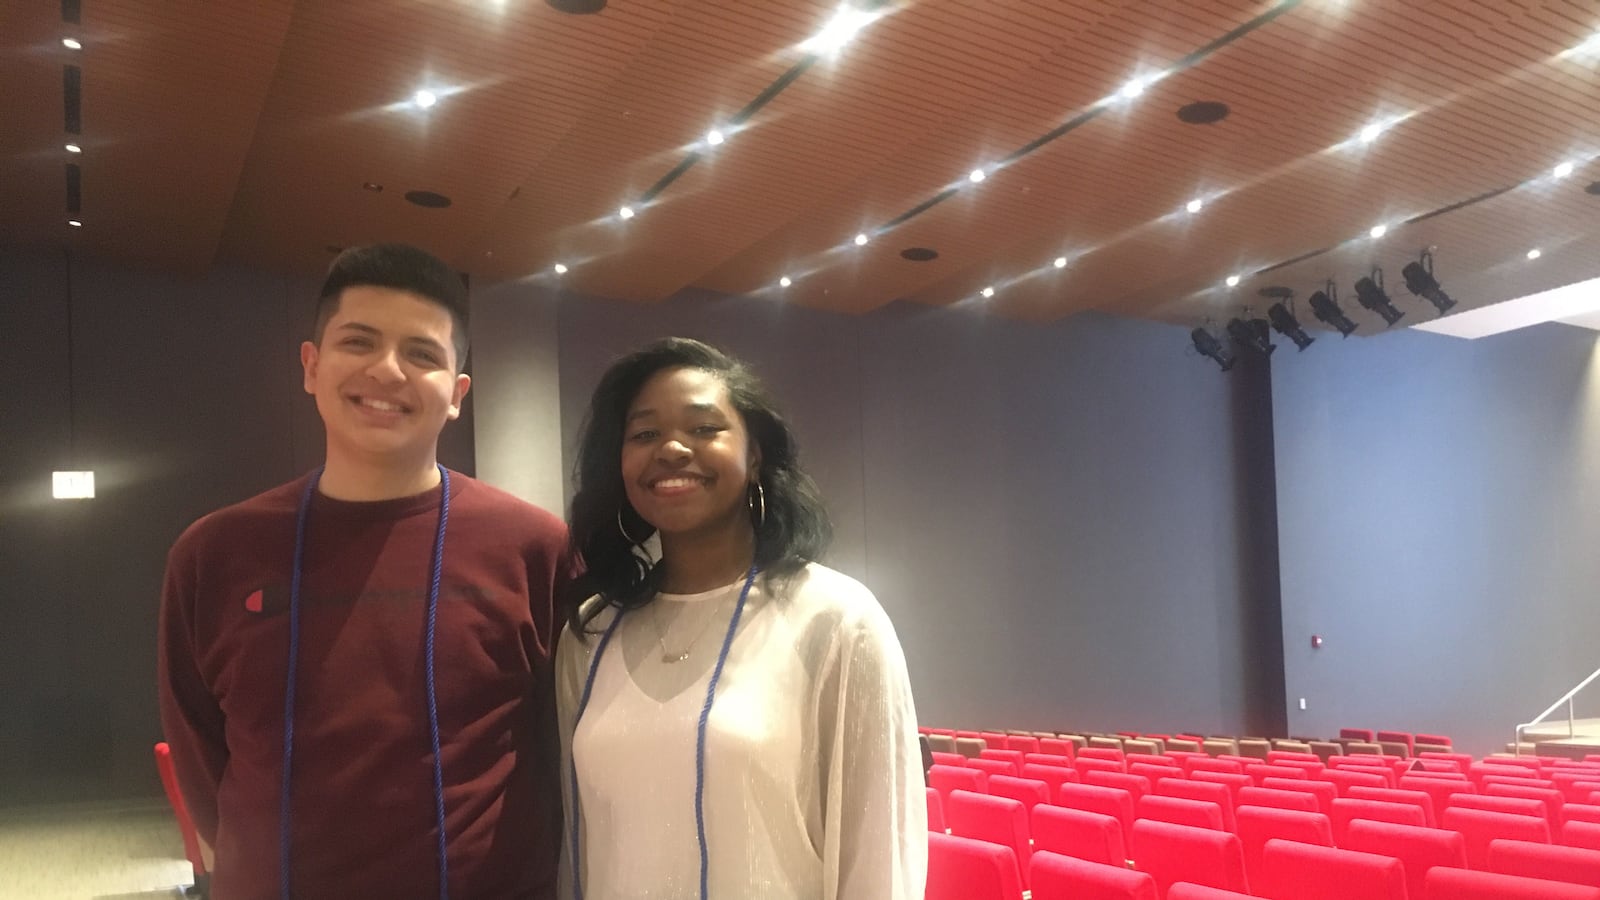 Alan Quintana and Cheyenne Henry stand in the auditorium of Malcolm X College.